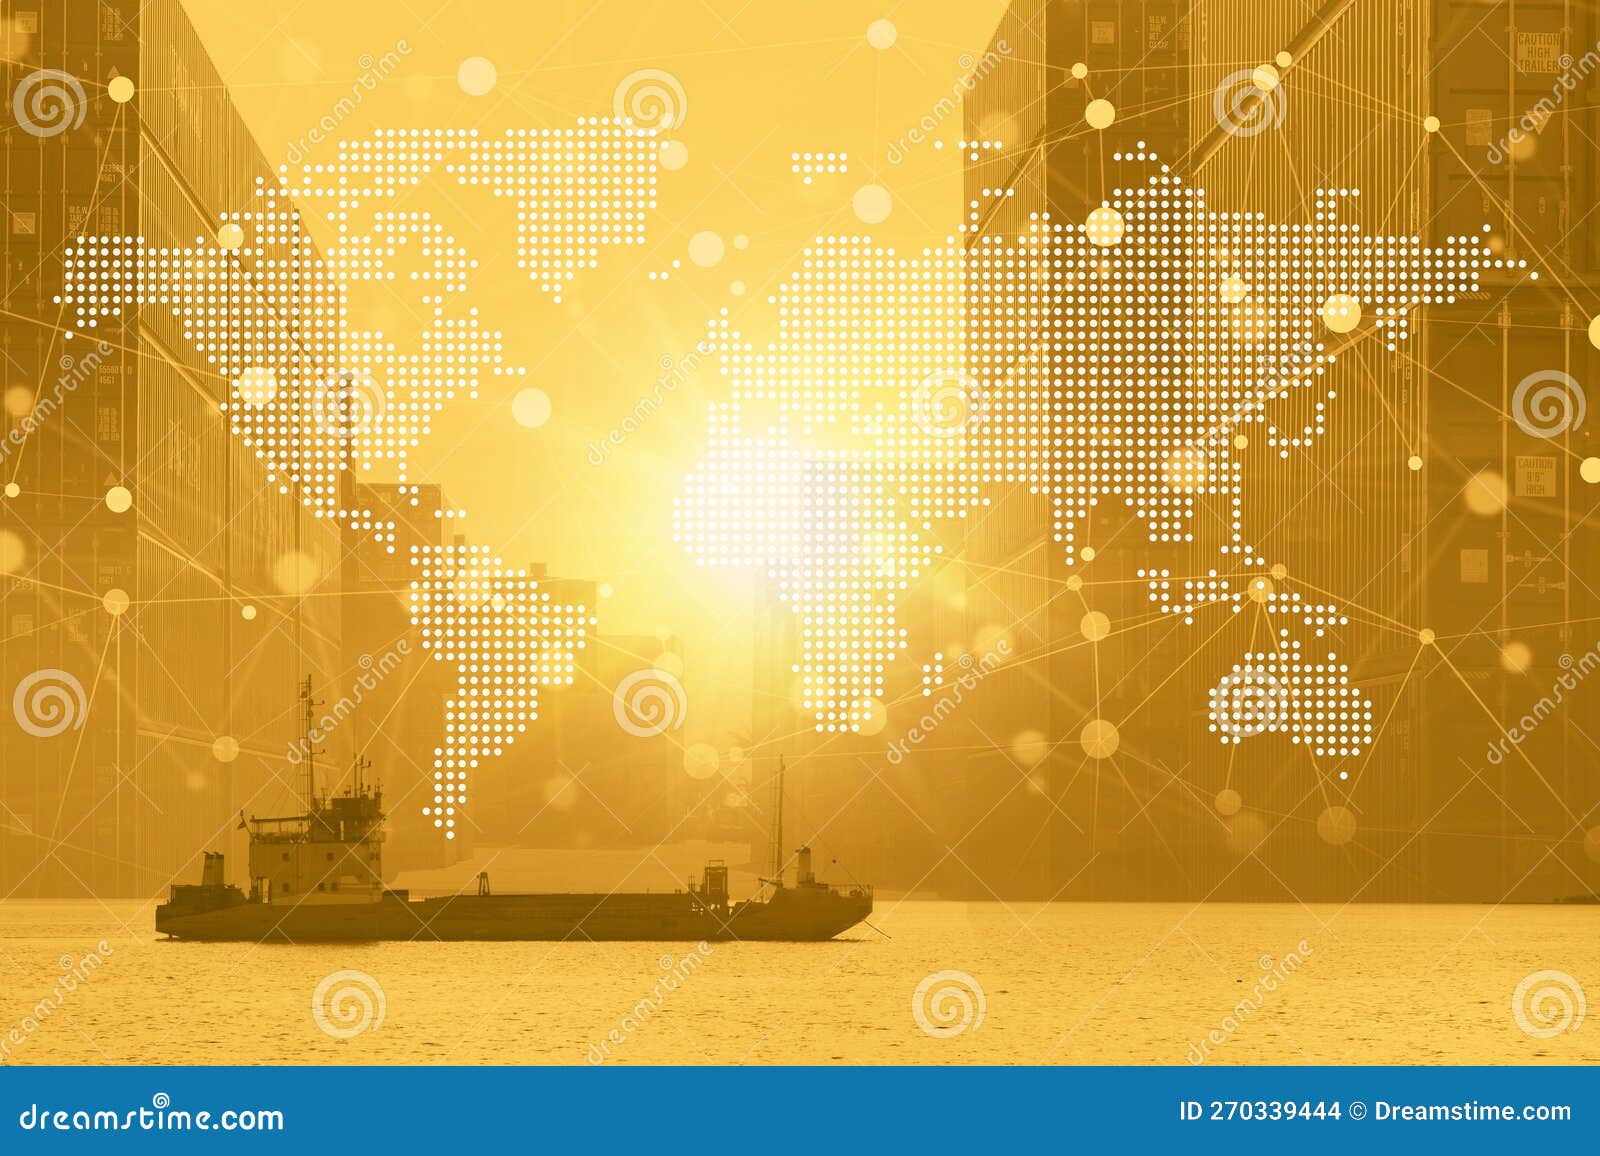 maritime cargo ship shipping oversea import export industry world wide  concept for banner background